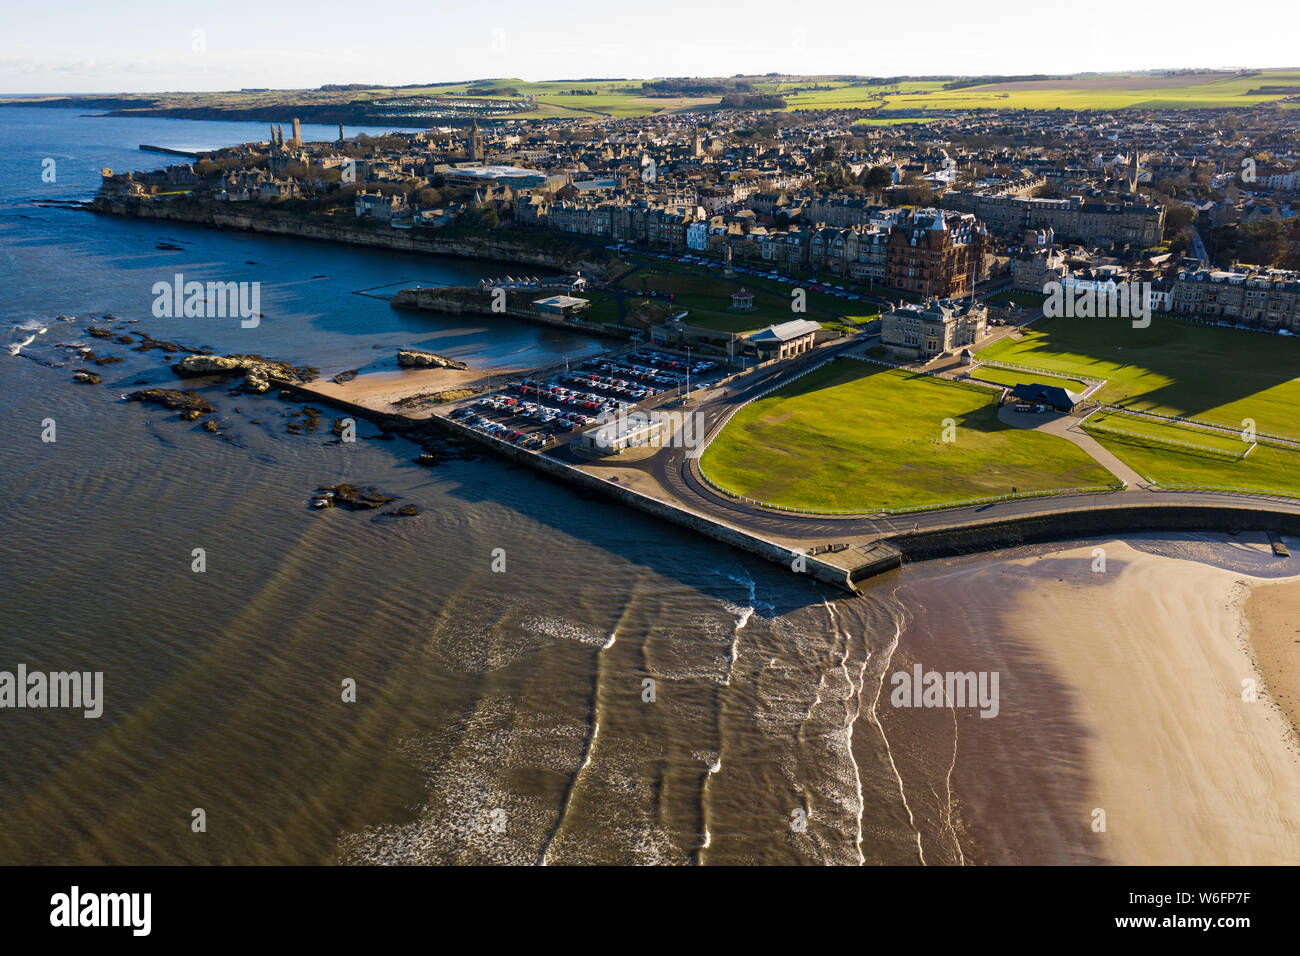 Aerial view of St Andrews from West Sands. The rocky coastline and the Old Course of St Andrews can both be seen in this stunning photo. Stock Photo